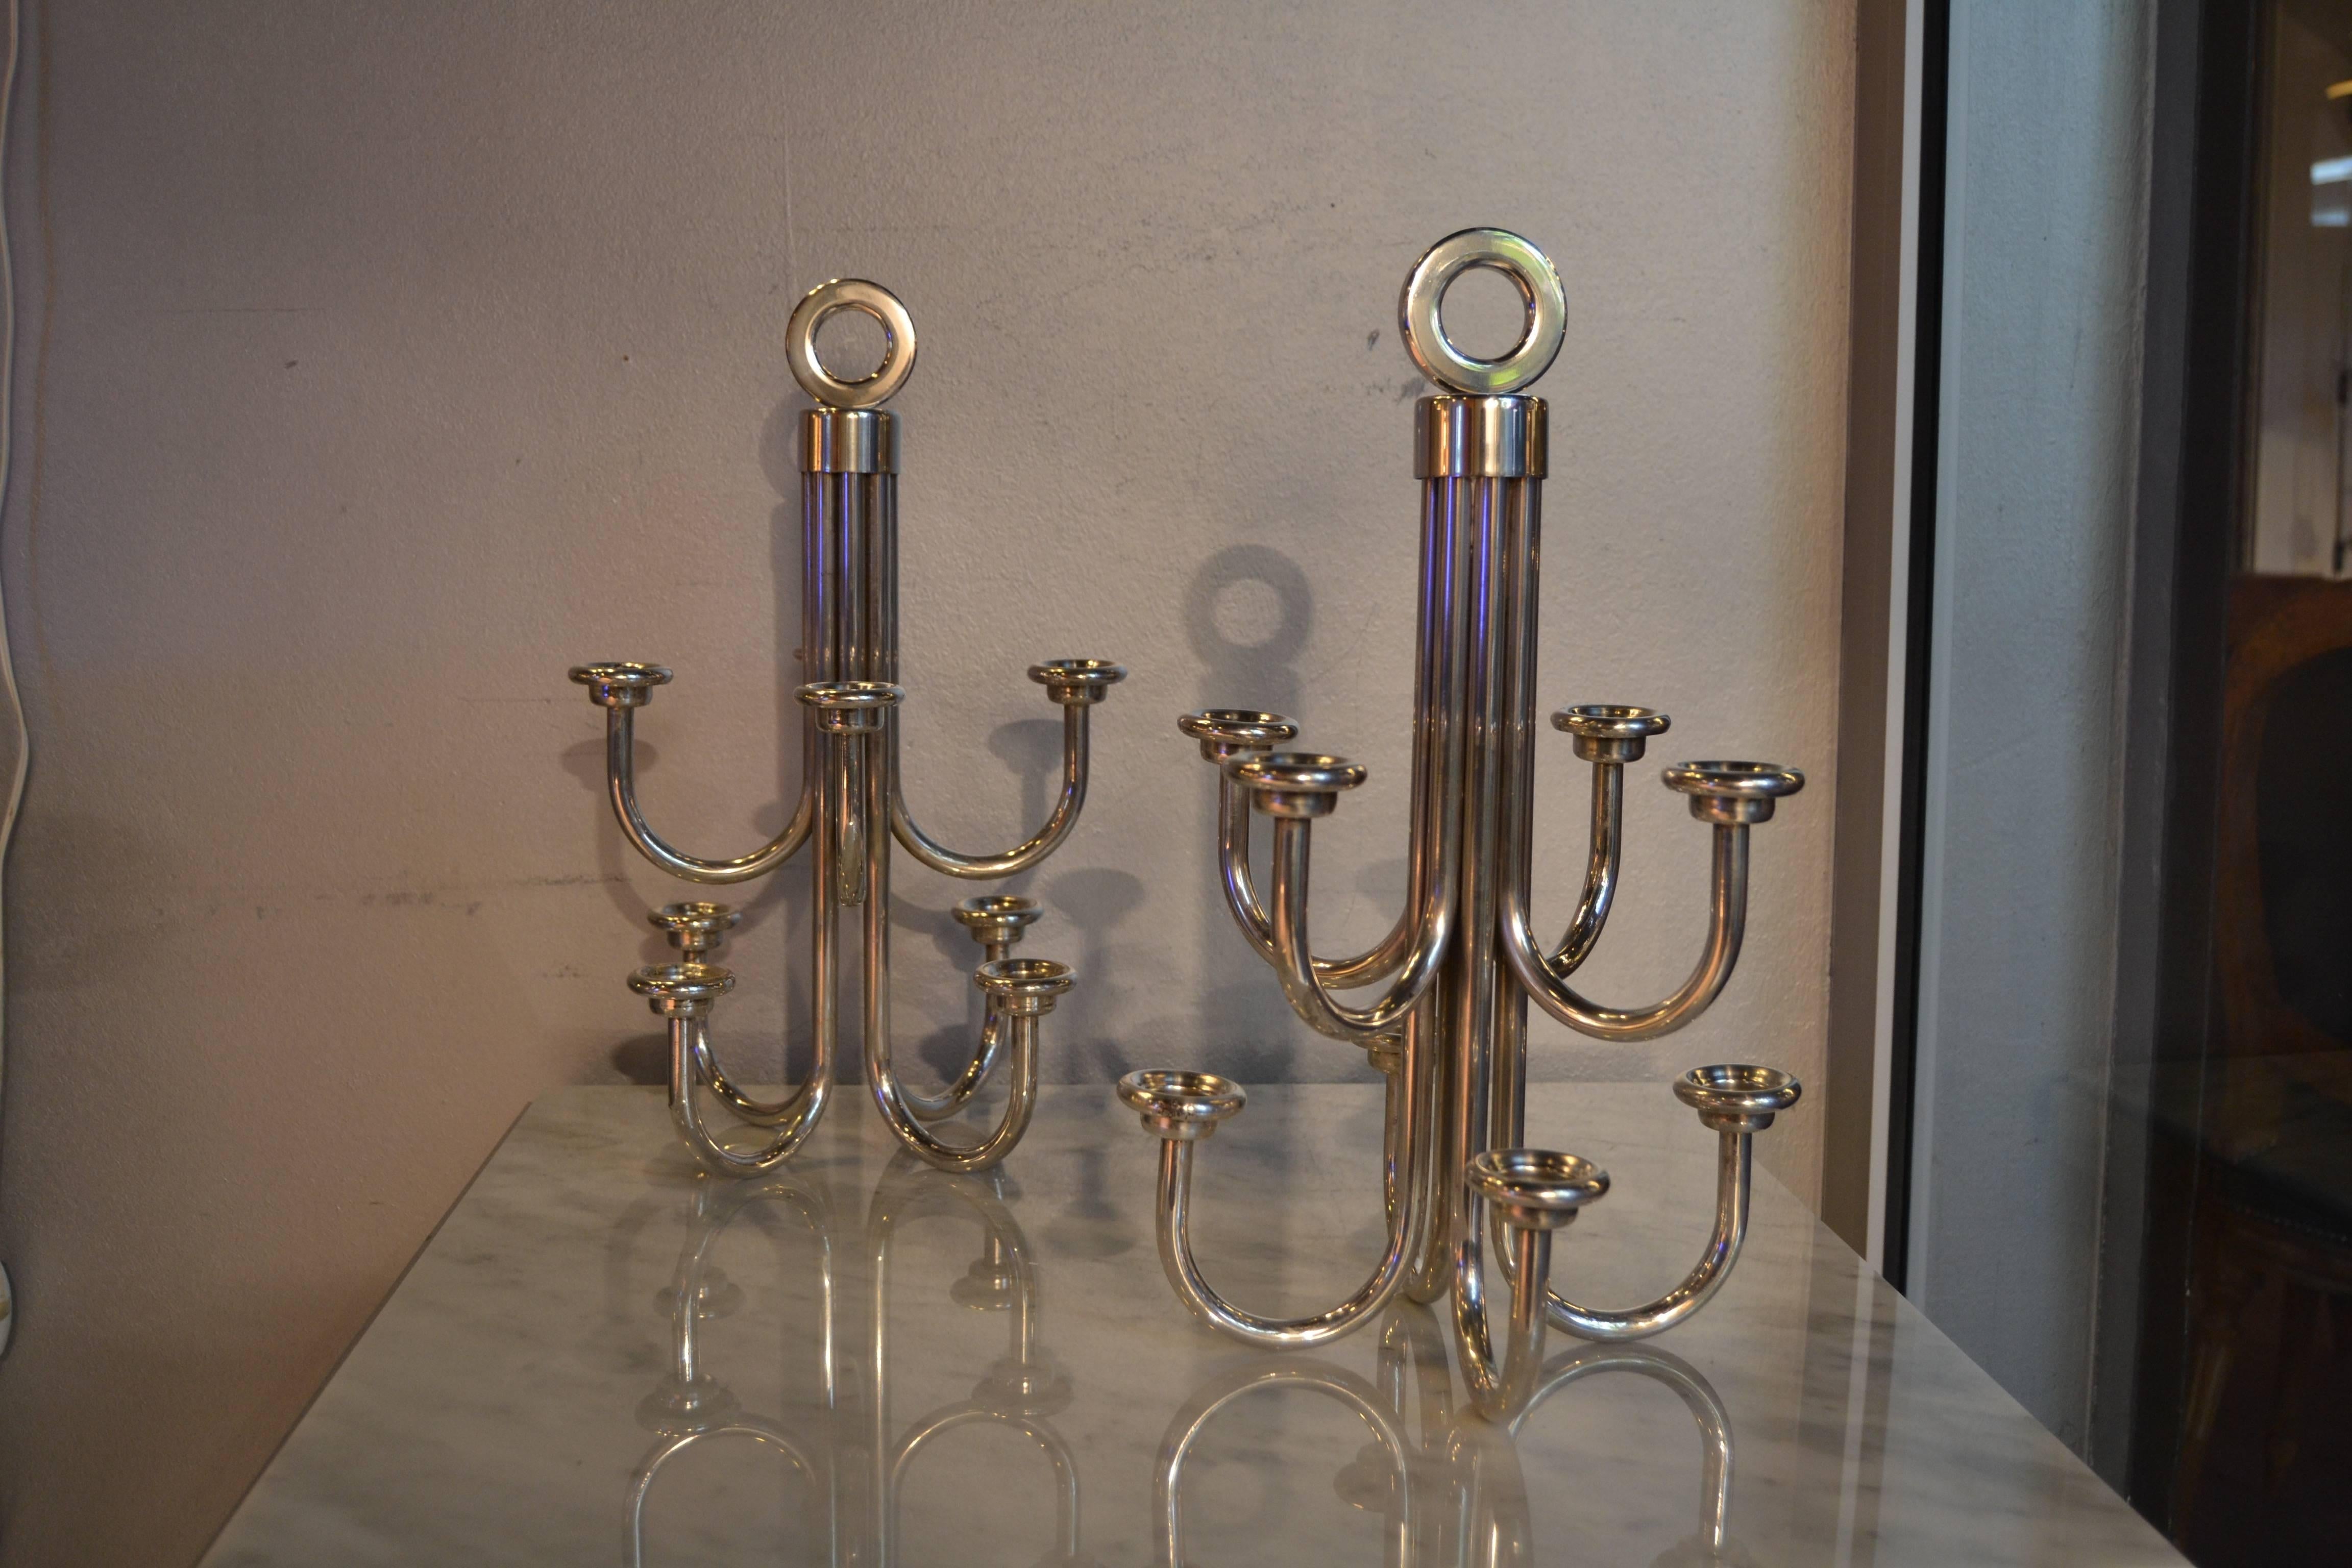 Pair of 1950 candle holders on silver plated metal with.
Great vintage condition for this elegant pair of candle holders.